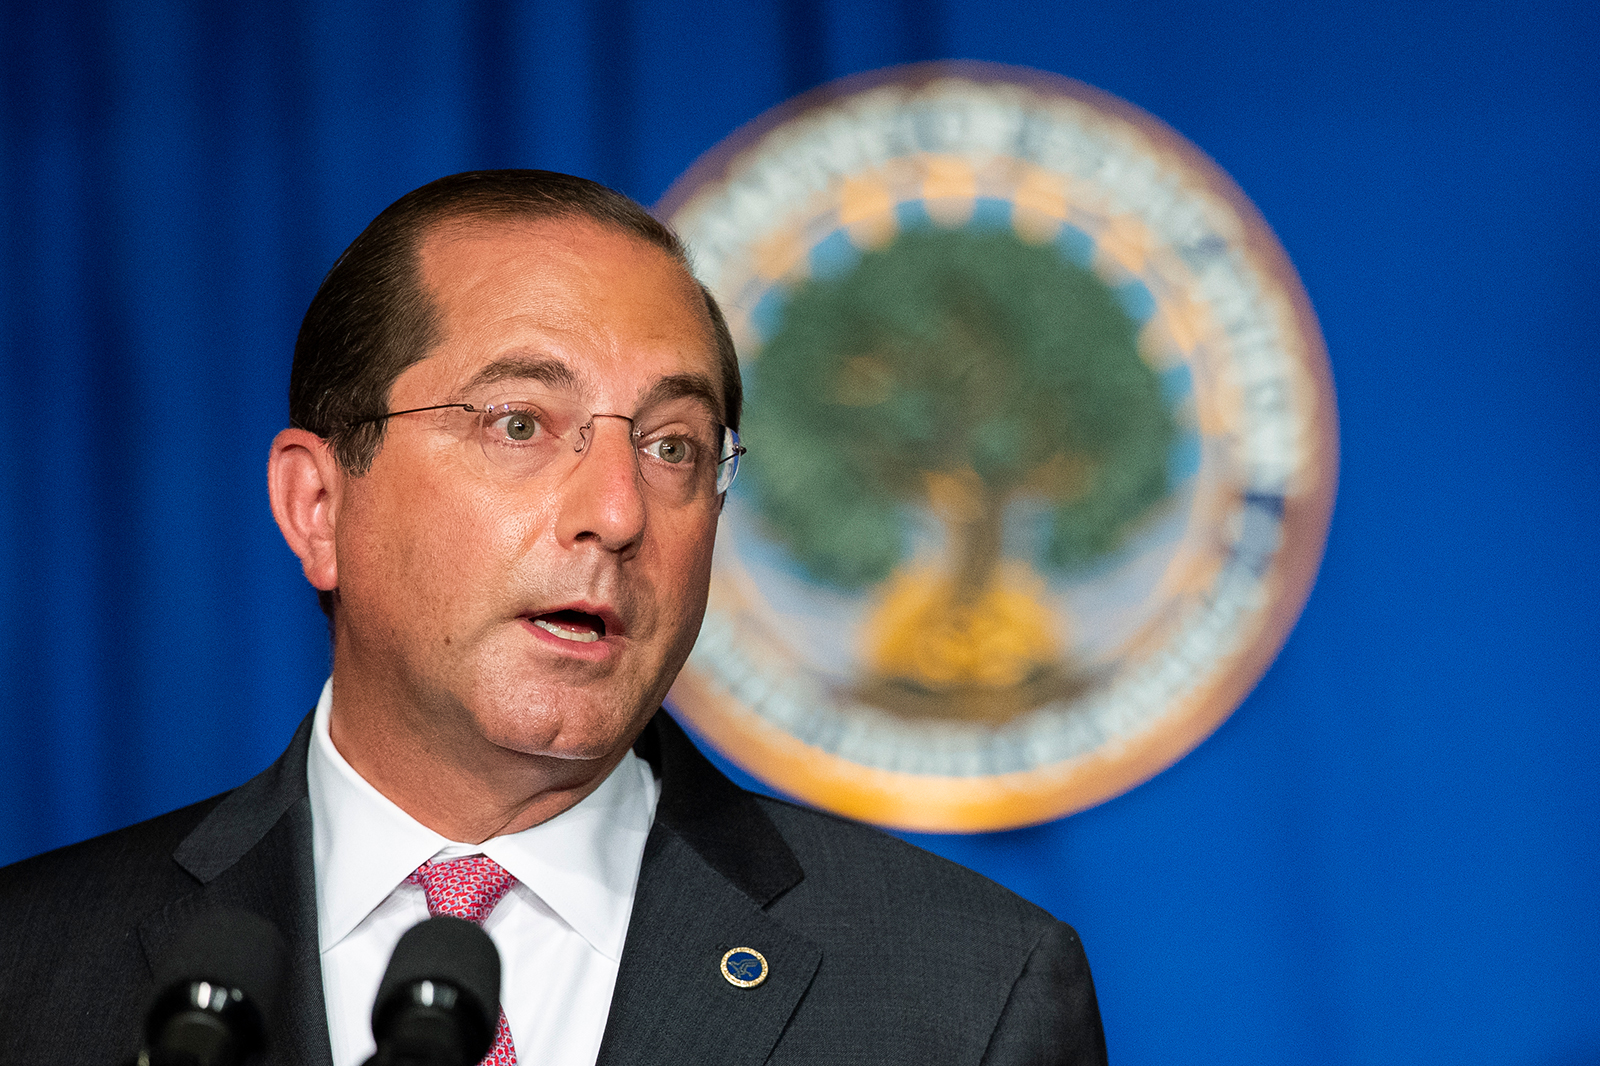 Department of Health and Human Services Secretary Alex Azar speaks during a White House Coronavirus Task Force briefing at the Department of Education building in Washington, DC on July 8.